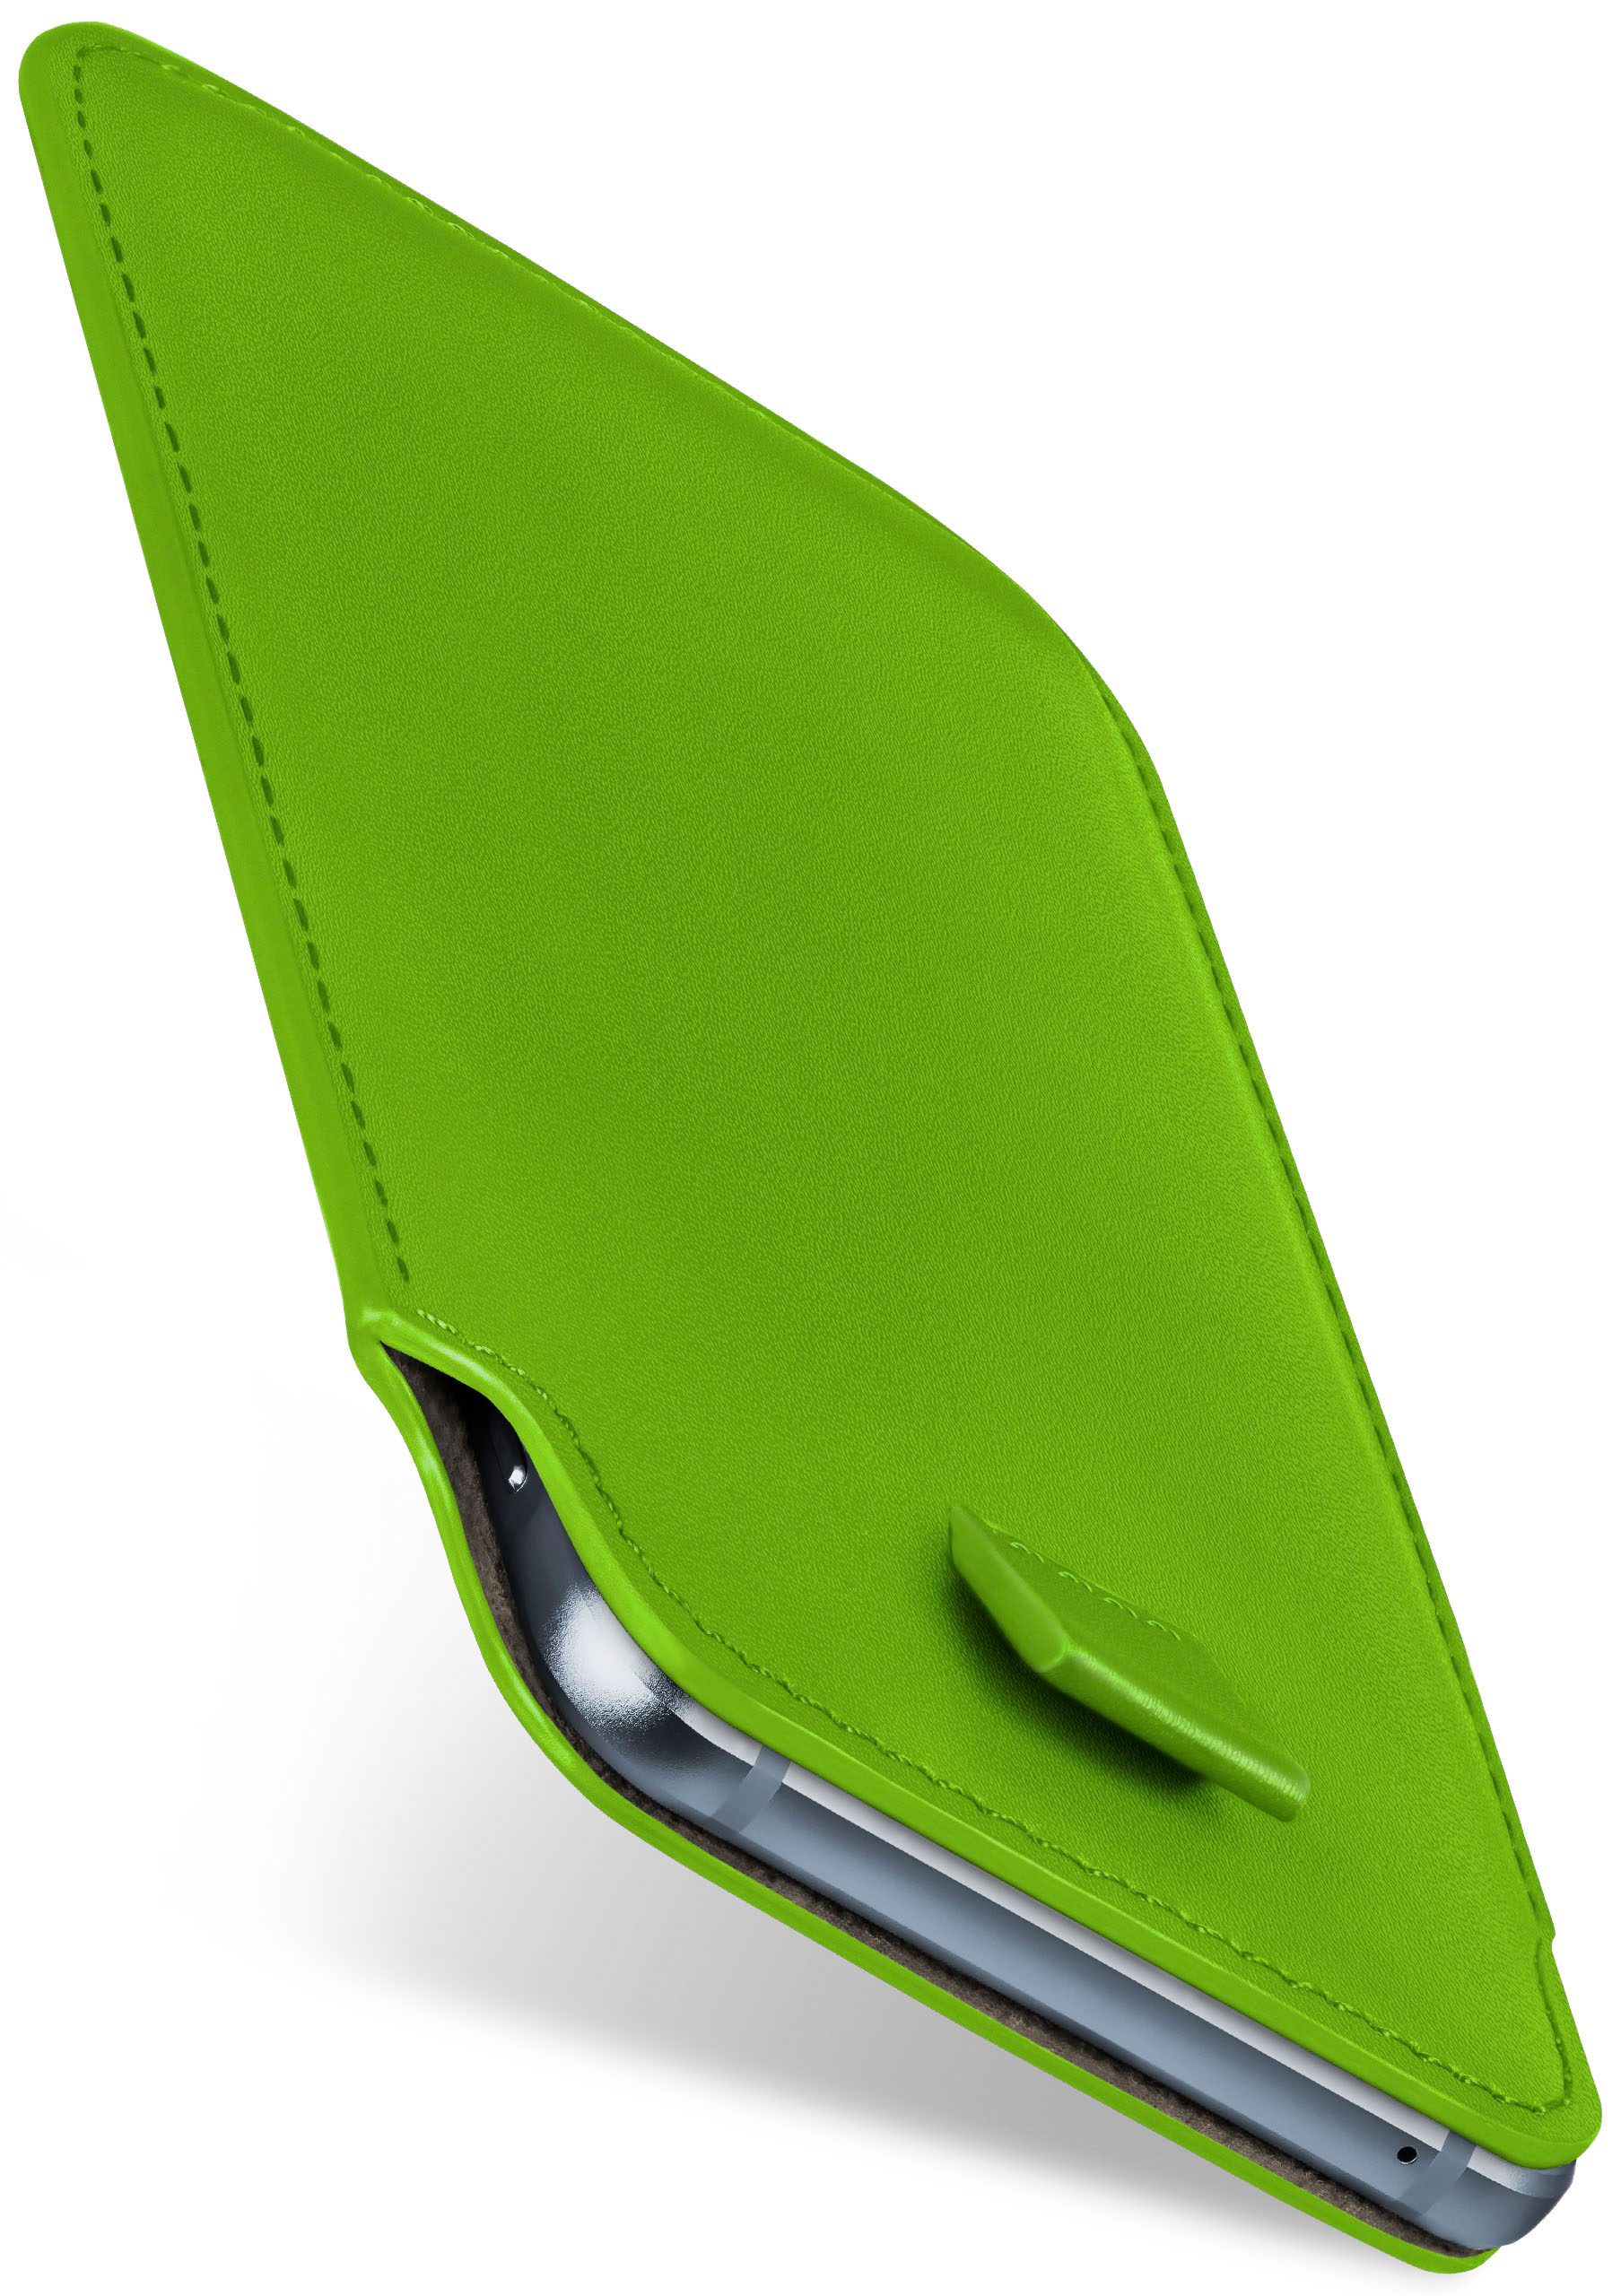 Cover, One MOEX HTC, Case, Full Lime-Green M7, Slide